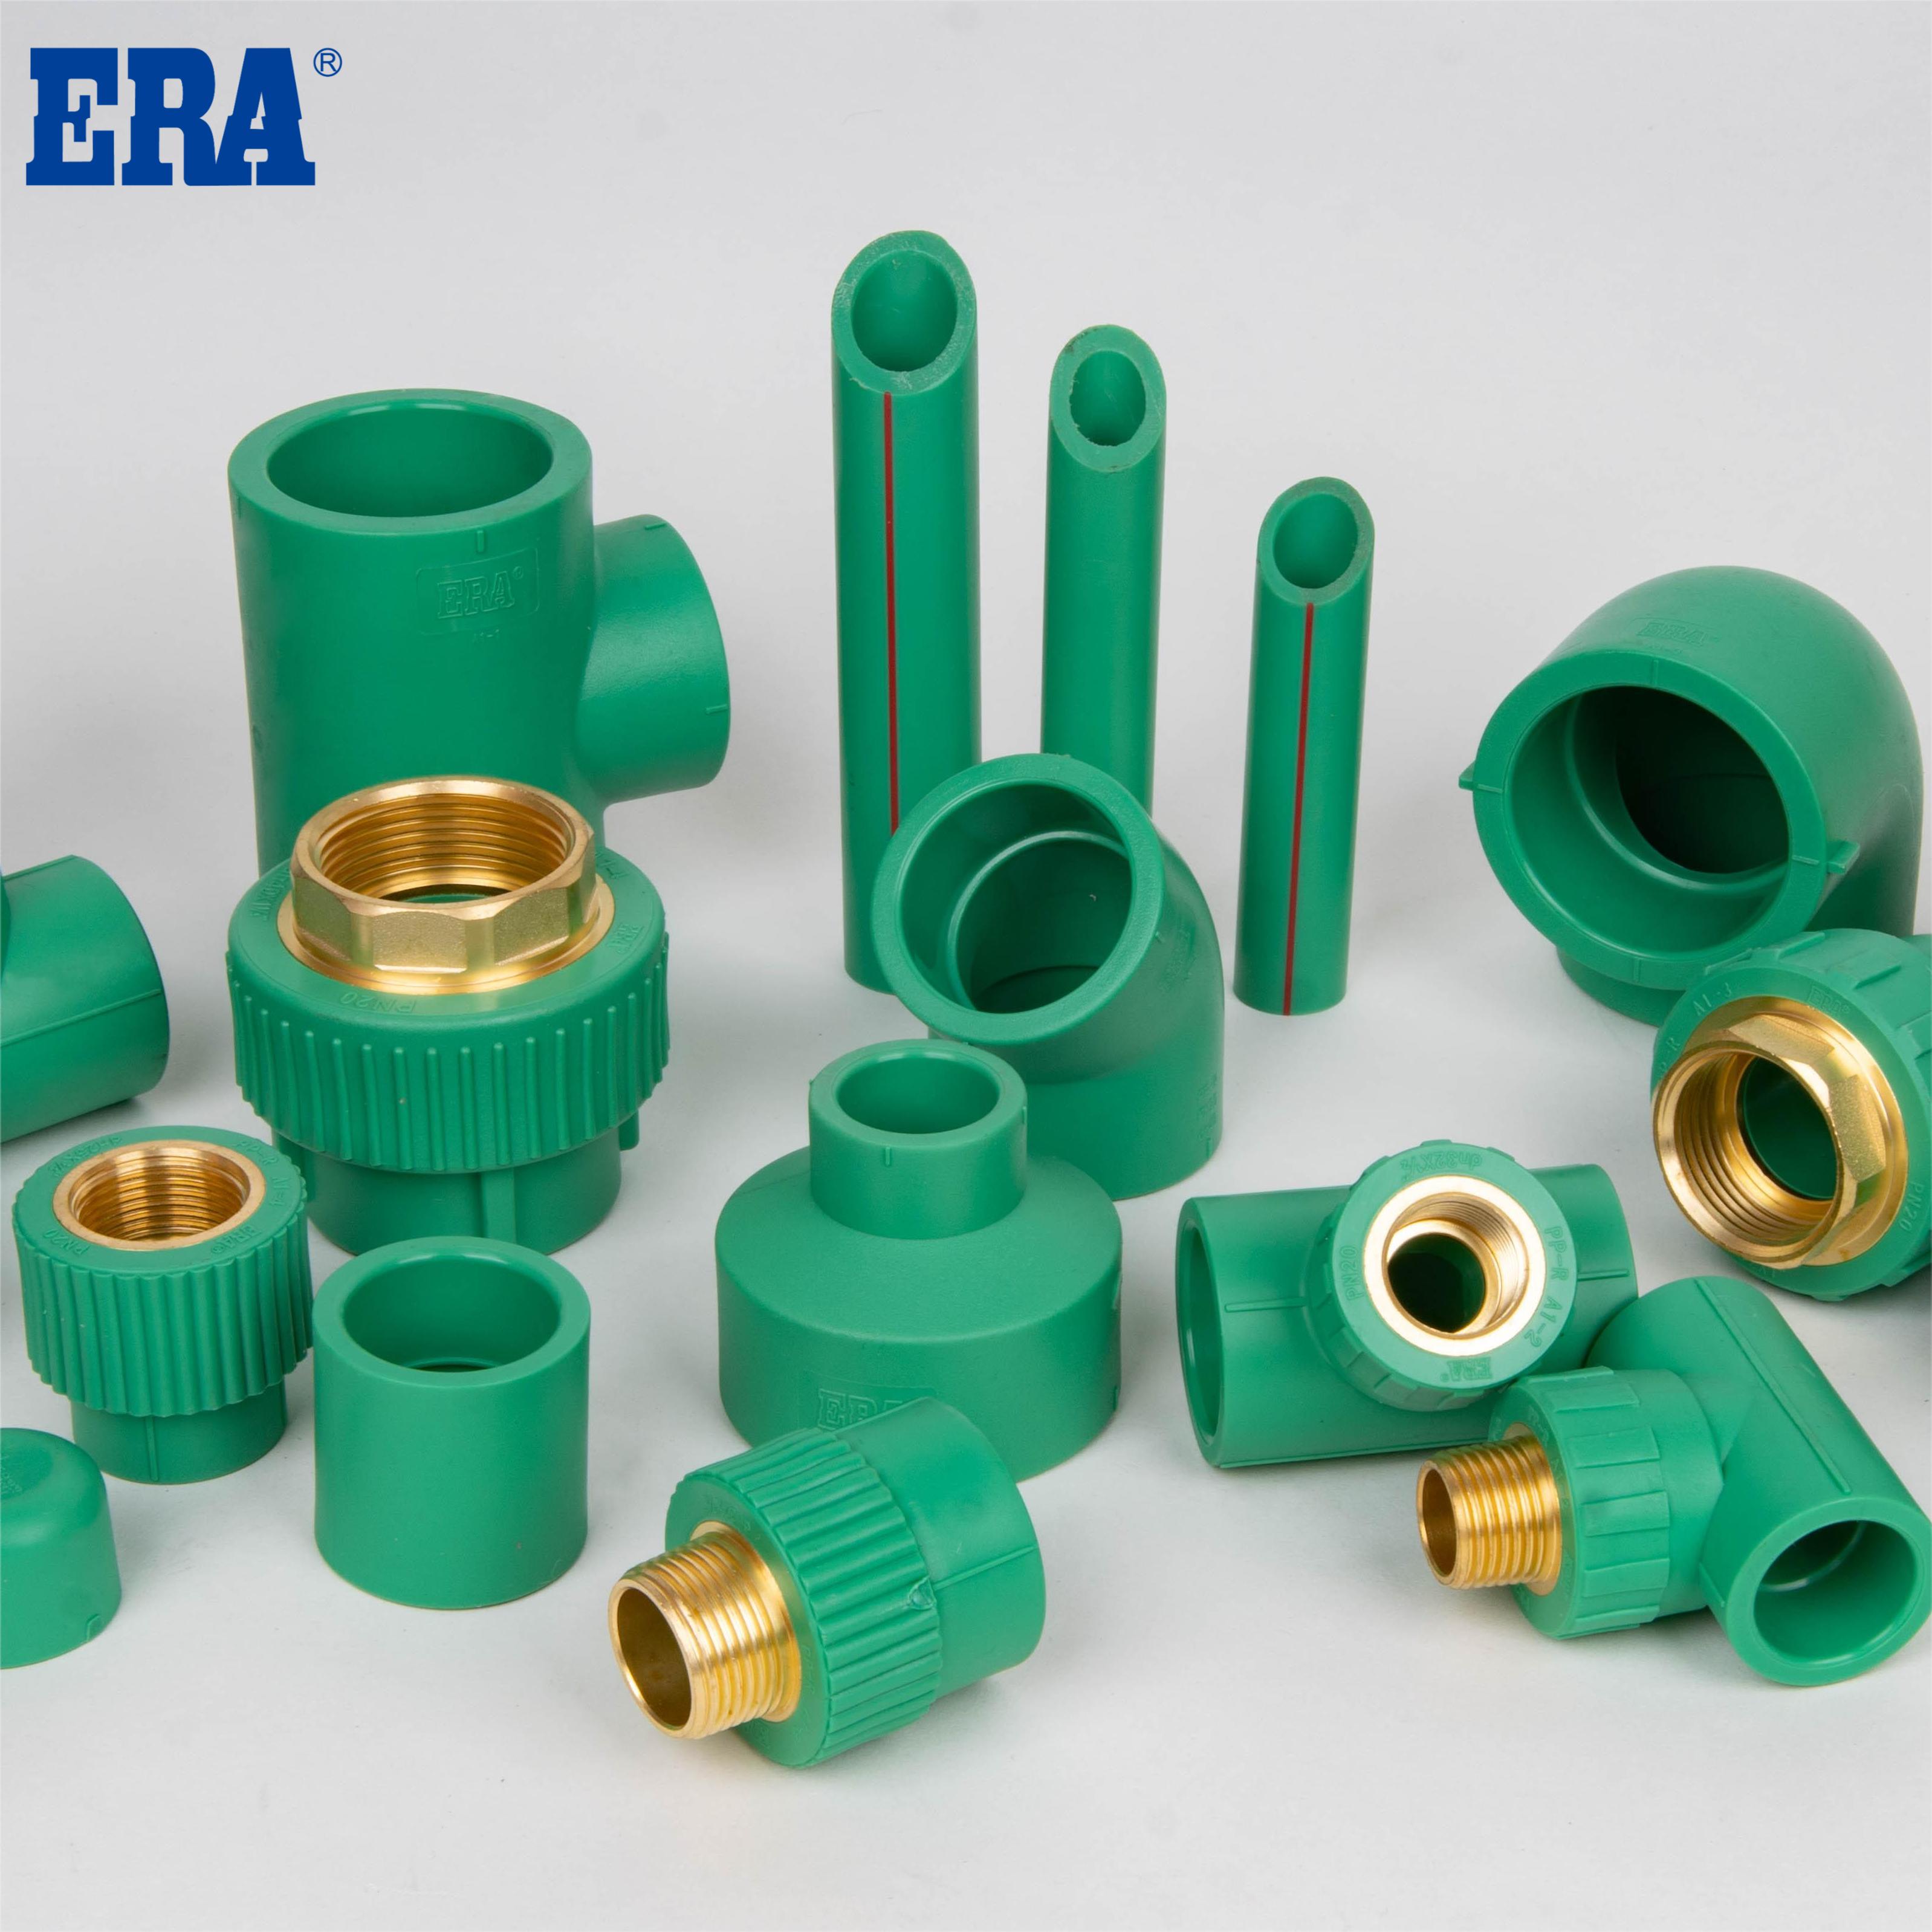 PPR FITTINGS TYPE II from China Manufacturer - ERA Pipes: NO. 1